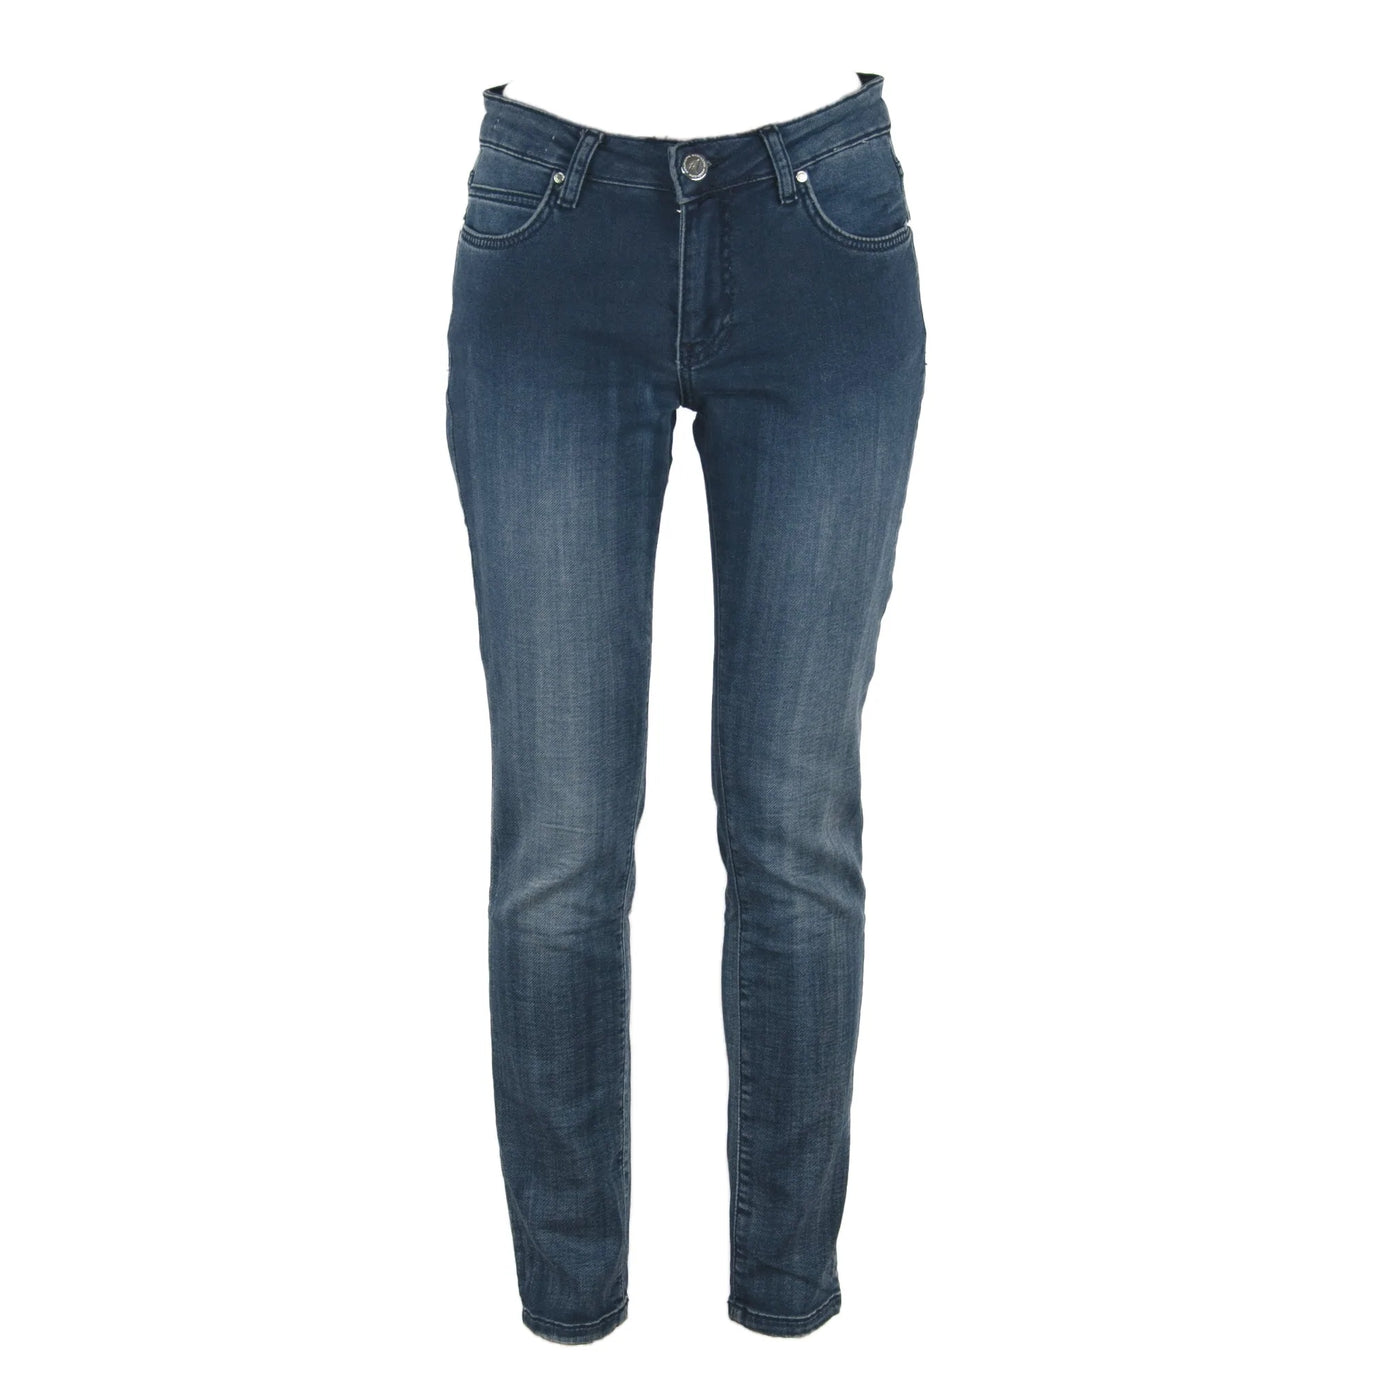 Maison Espin Blue Cotton Jeans & Pant Blue, feed-agegroup-adult, feed-color-Blue, feed-gender-female, Jeans & Pants - Women - Clothing, Maison Espin, W26 | IT40, W29 | IT43 at SEYMAYKA